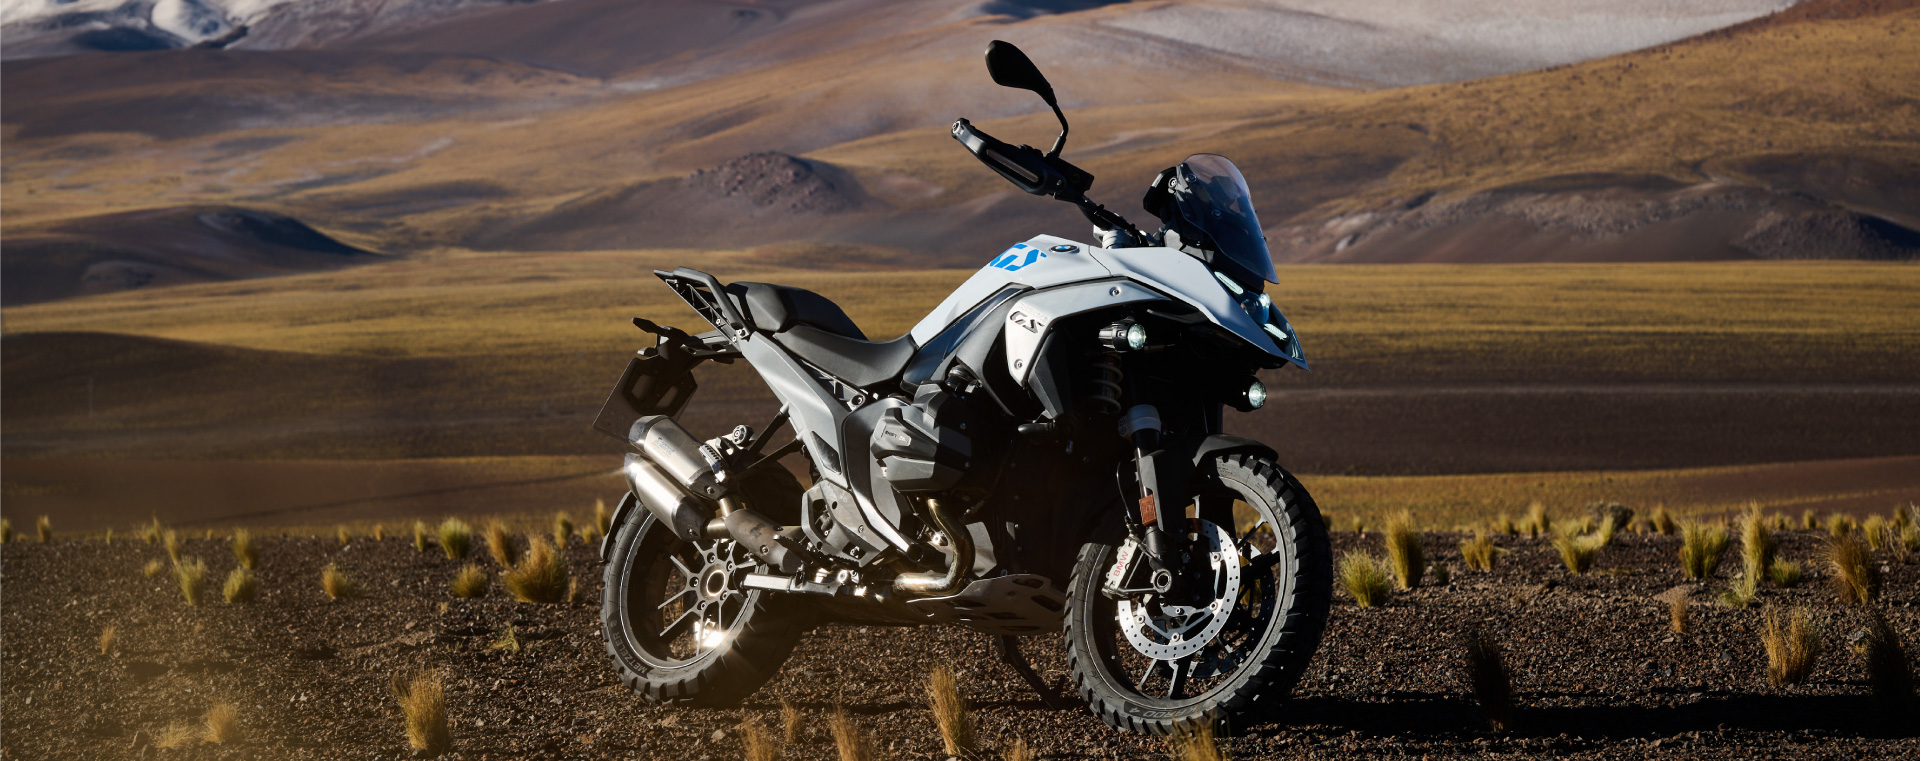 BMW Landing Pages R1300GS 01 1